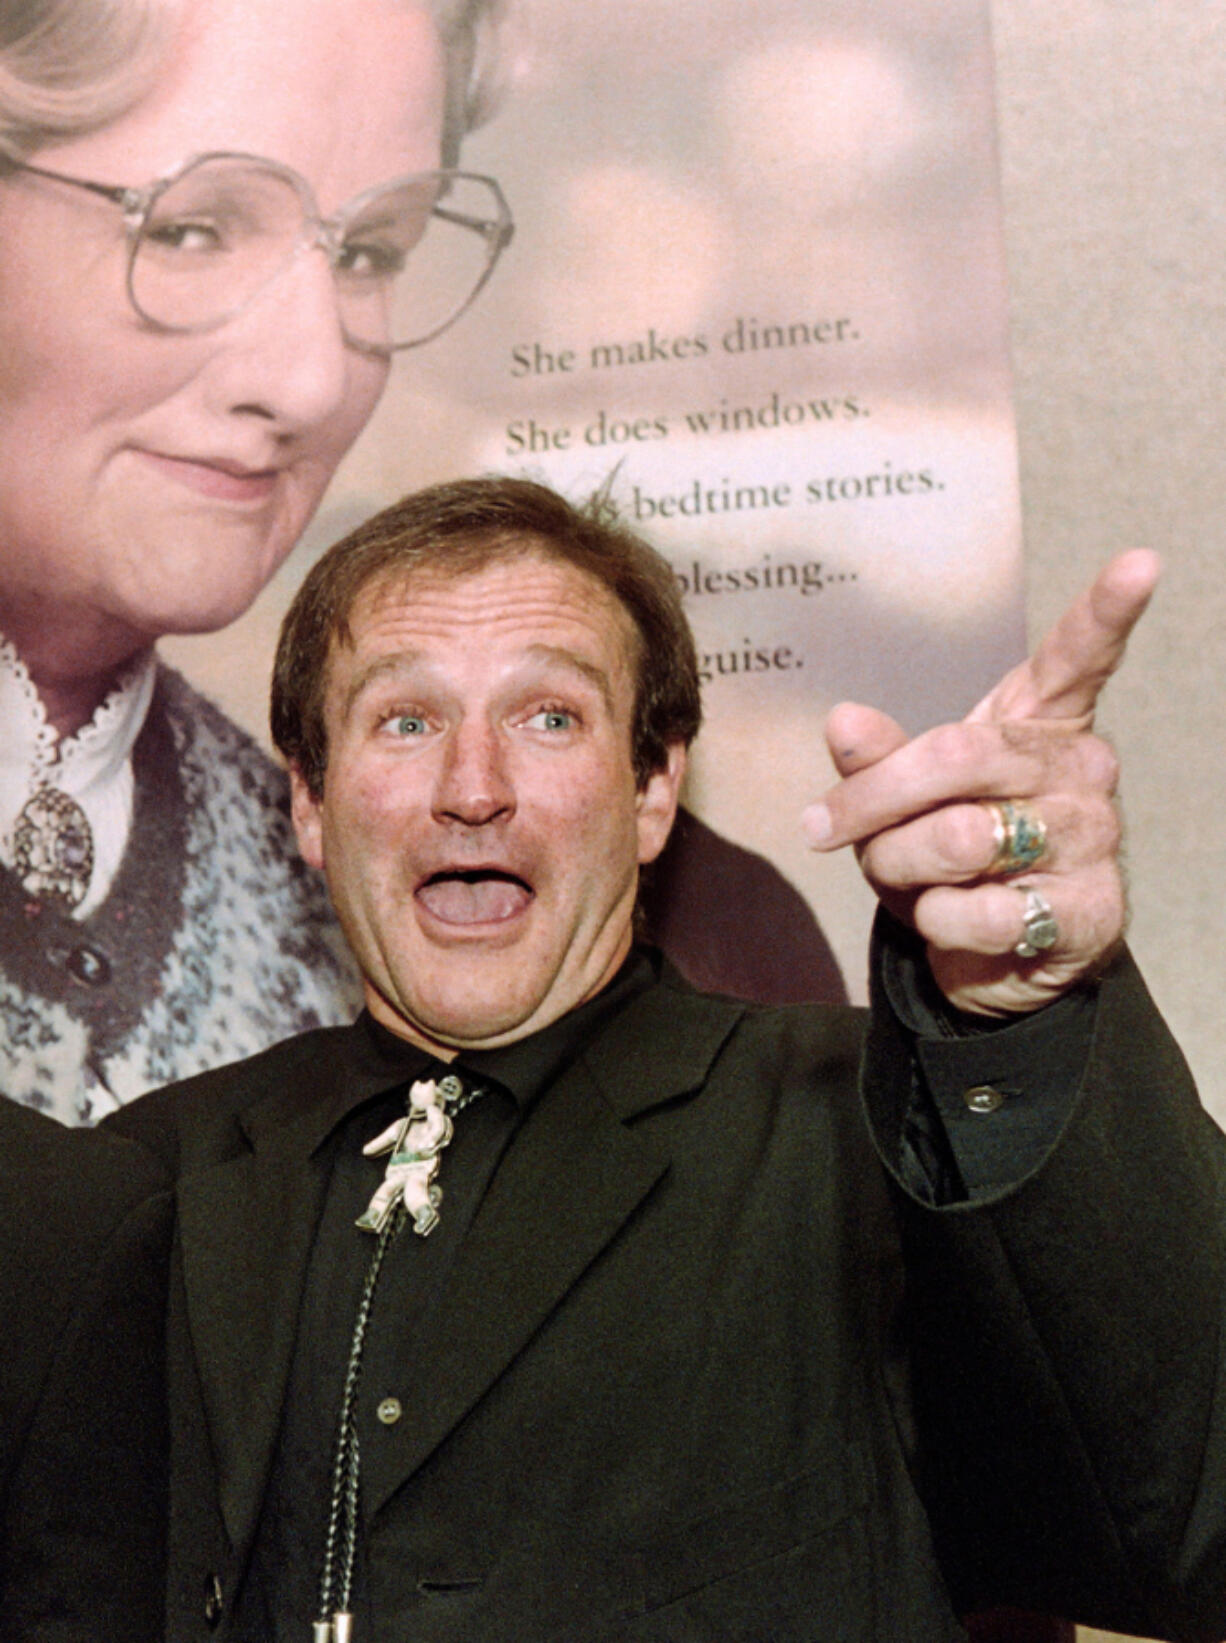 Robin Williams attends the premiere of &ldquo;Mrs. Doubtfire&rdquo; in Beverly Hills, Calif., on Nov. 22, 1993.